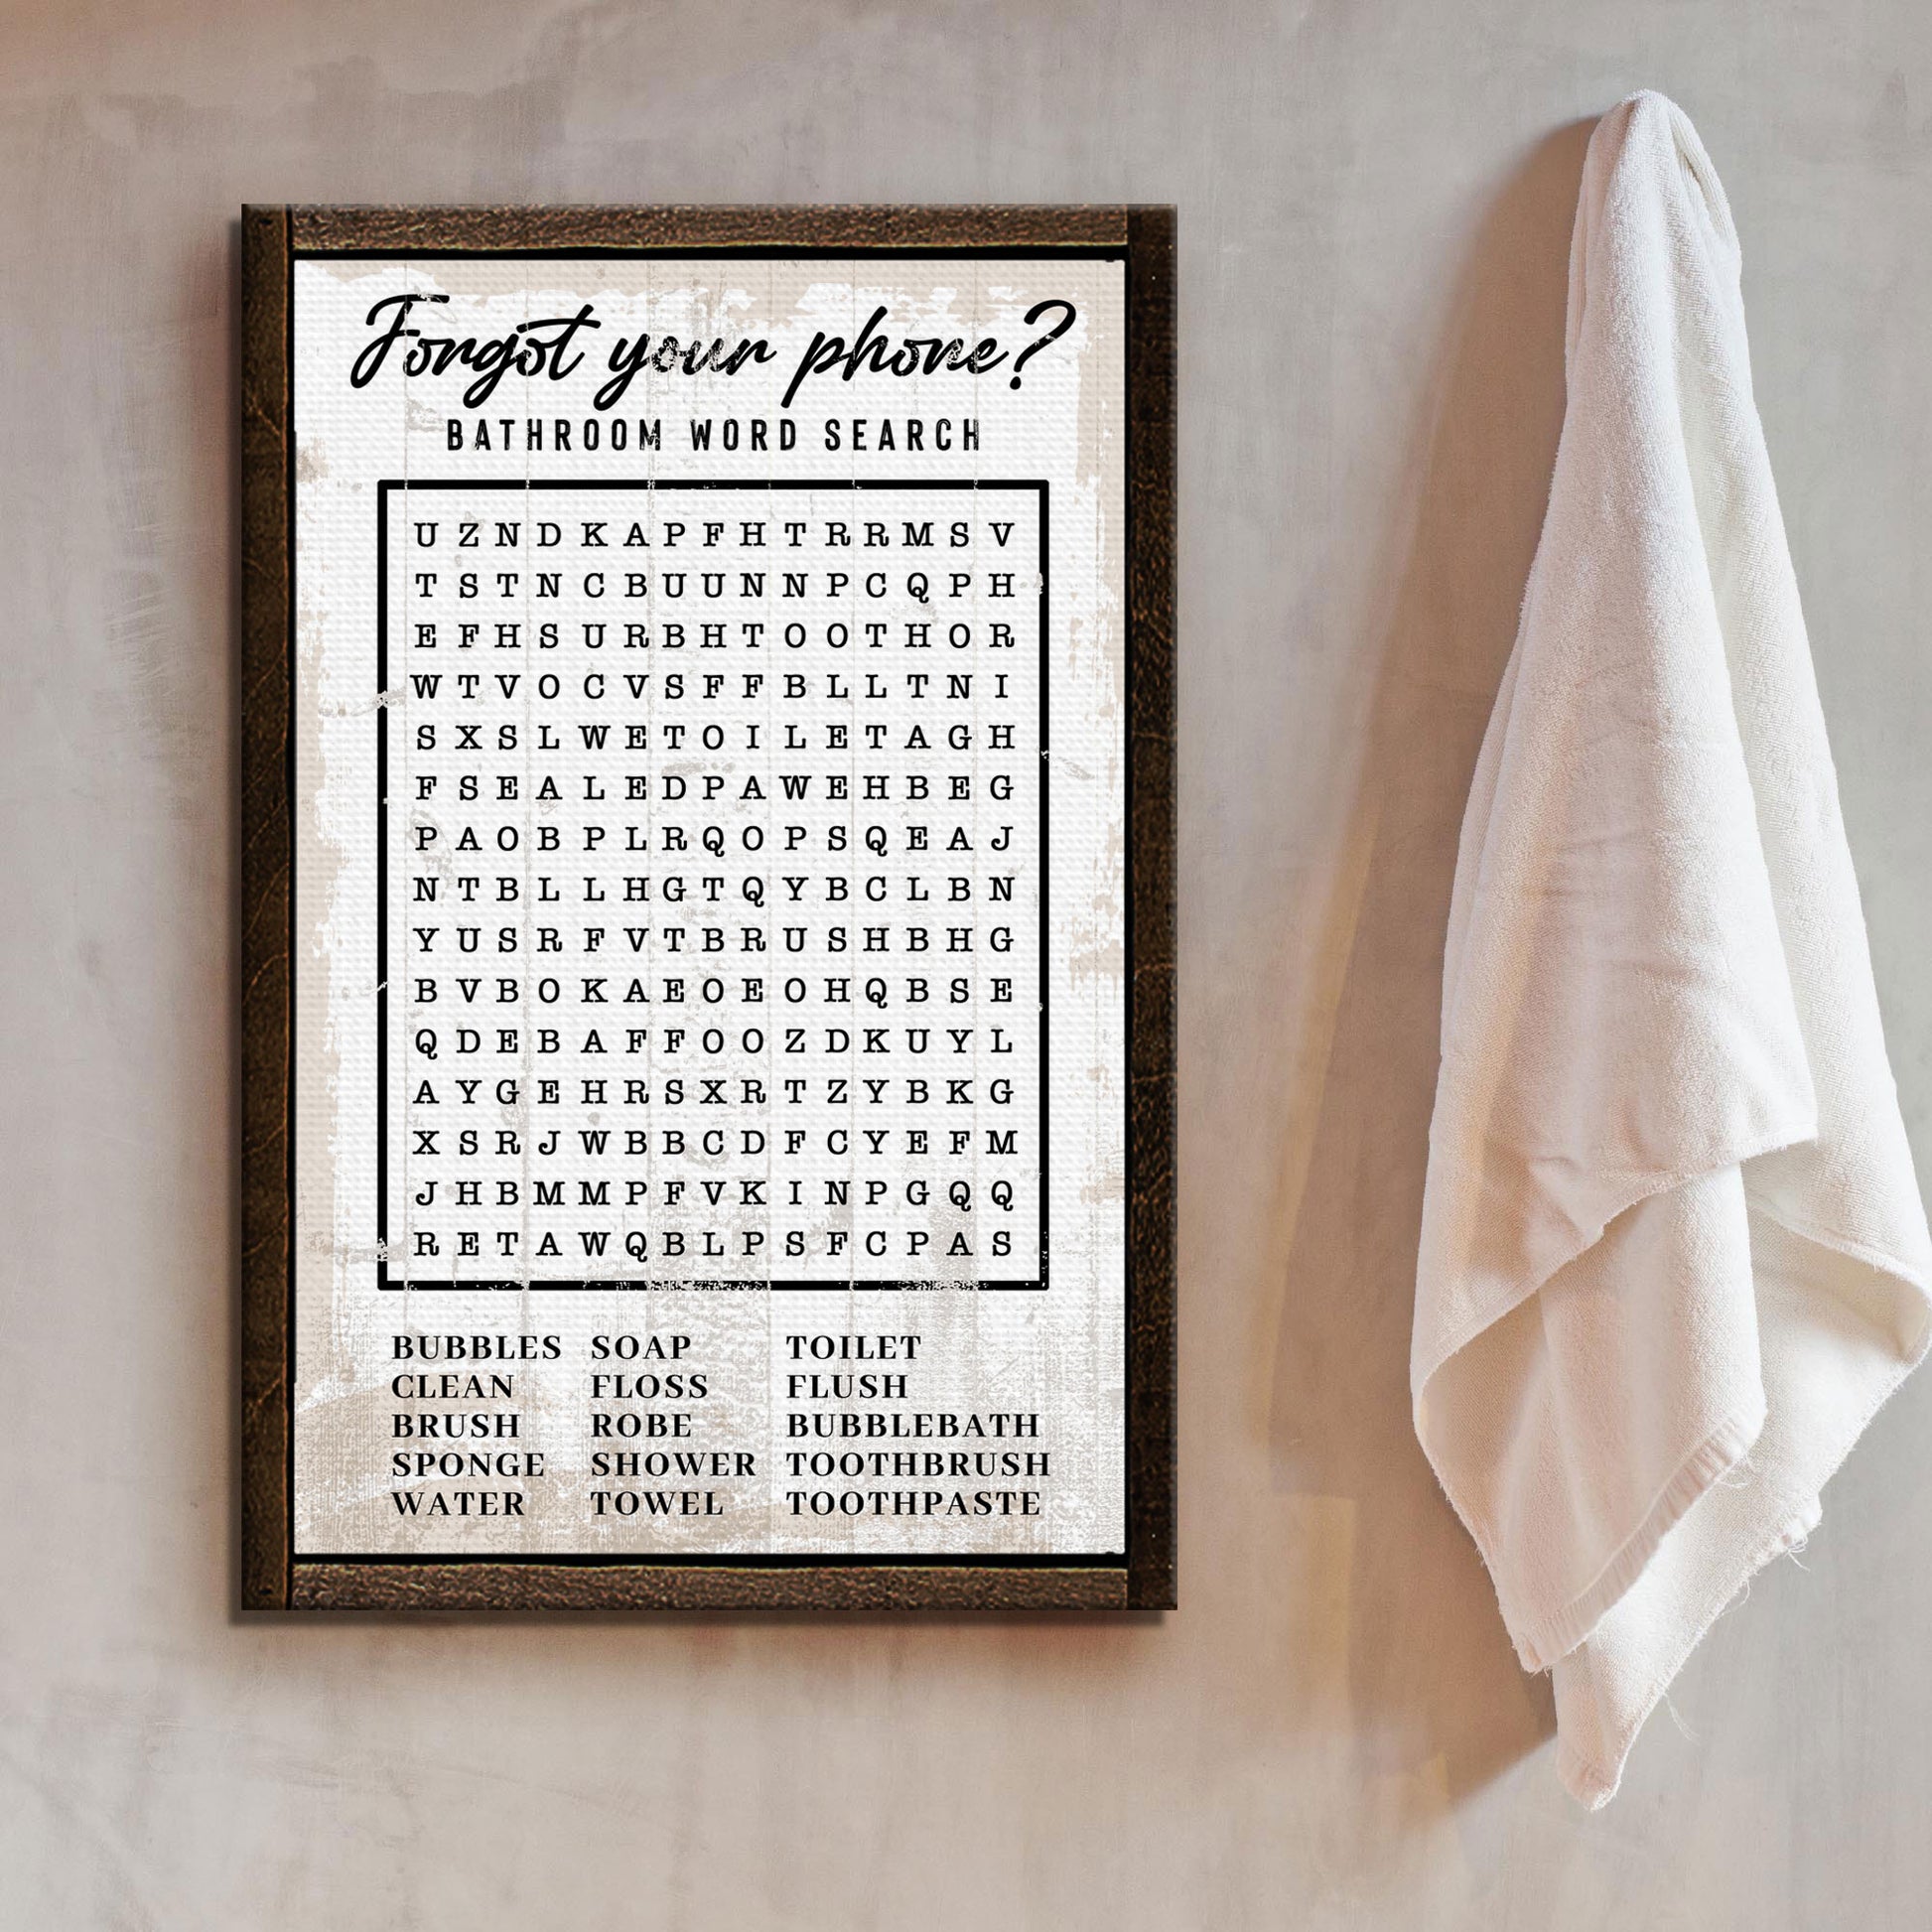 Bathroom Word Search Sign - Image by Tailored Canvases